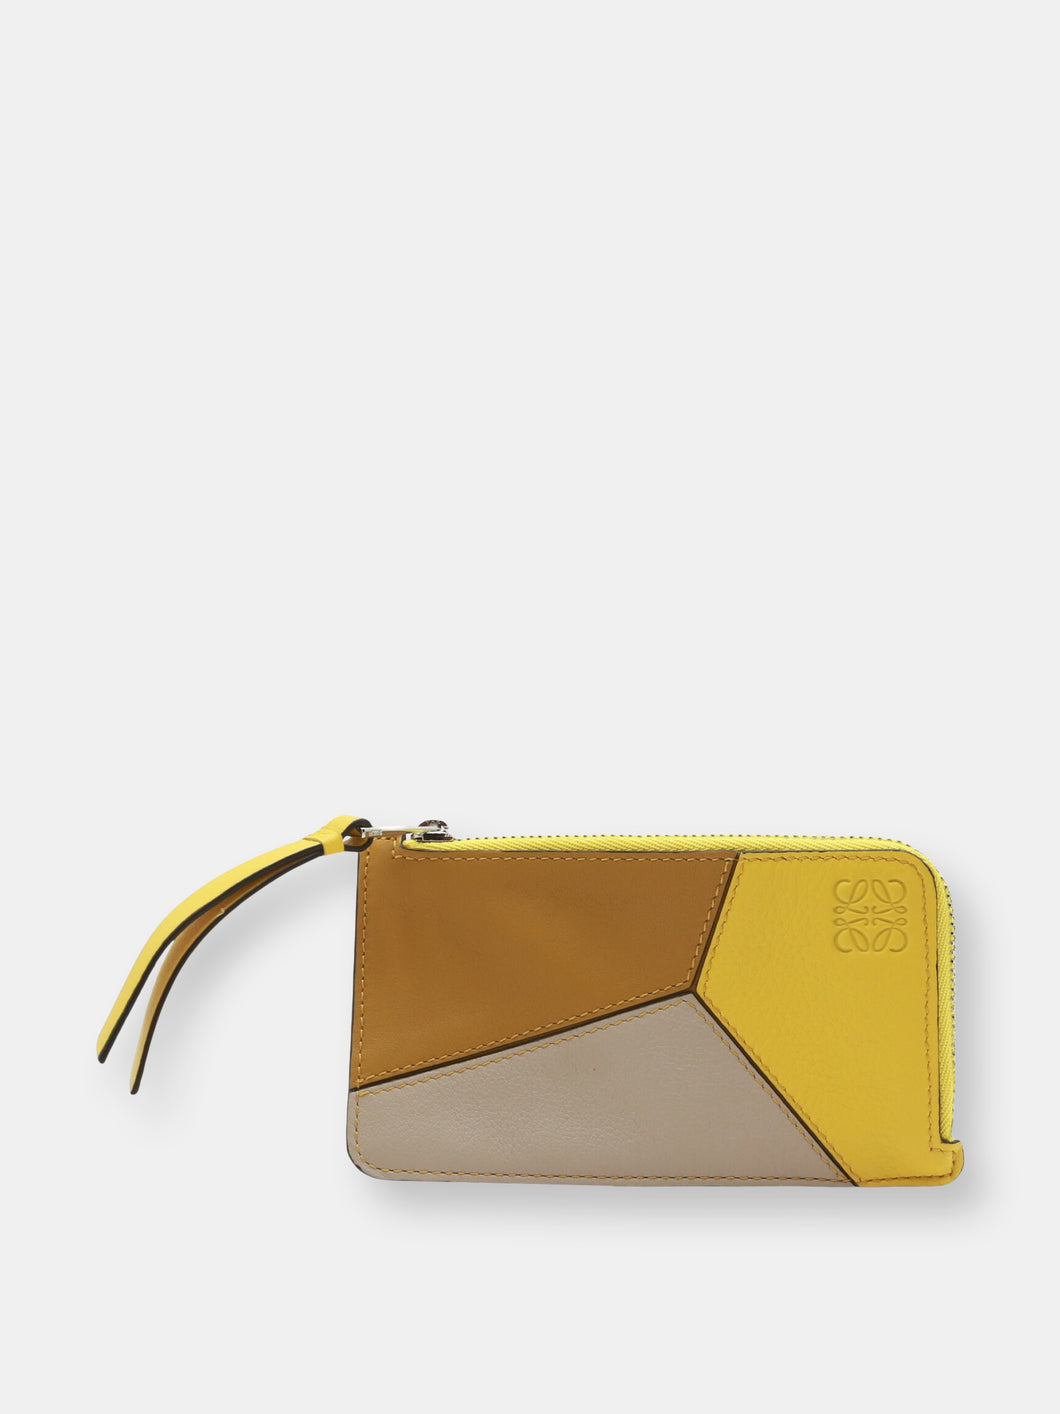 Loewe Women's Puzzle Coin and Card Holder Leather Wallet